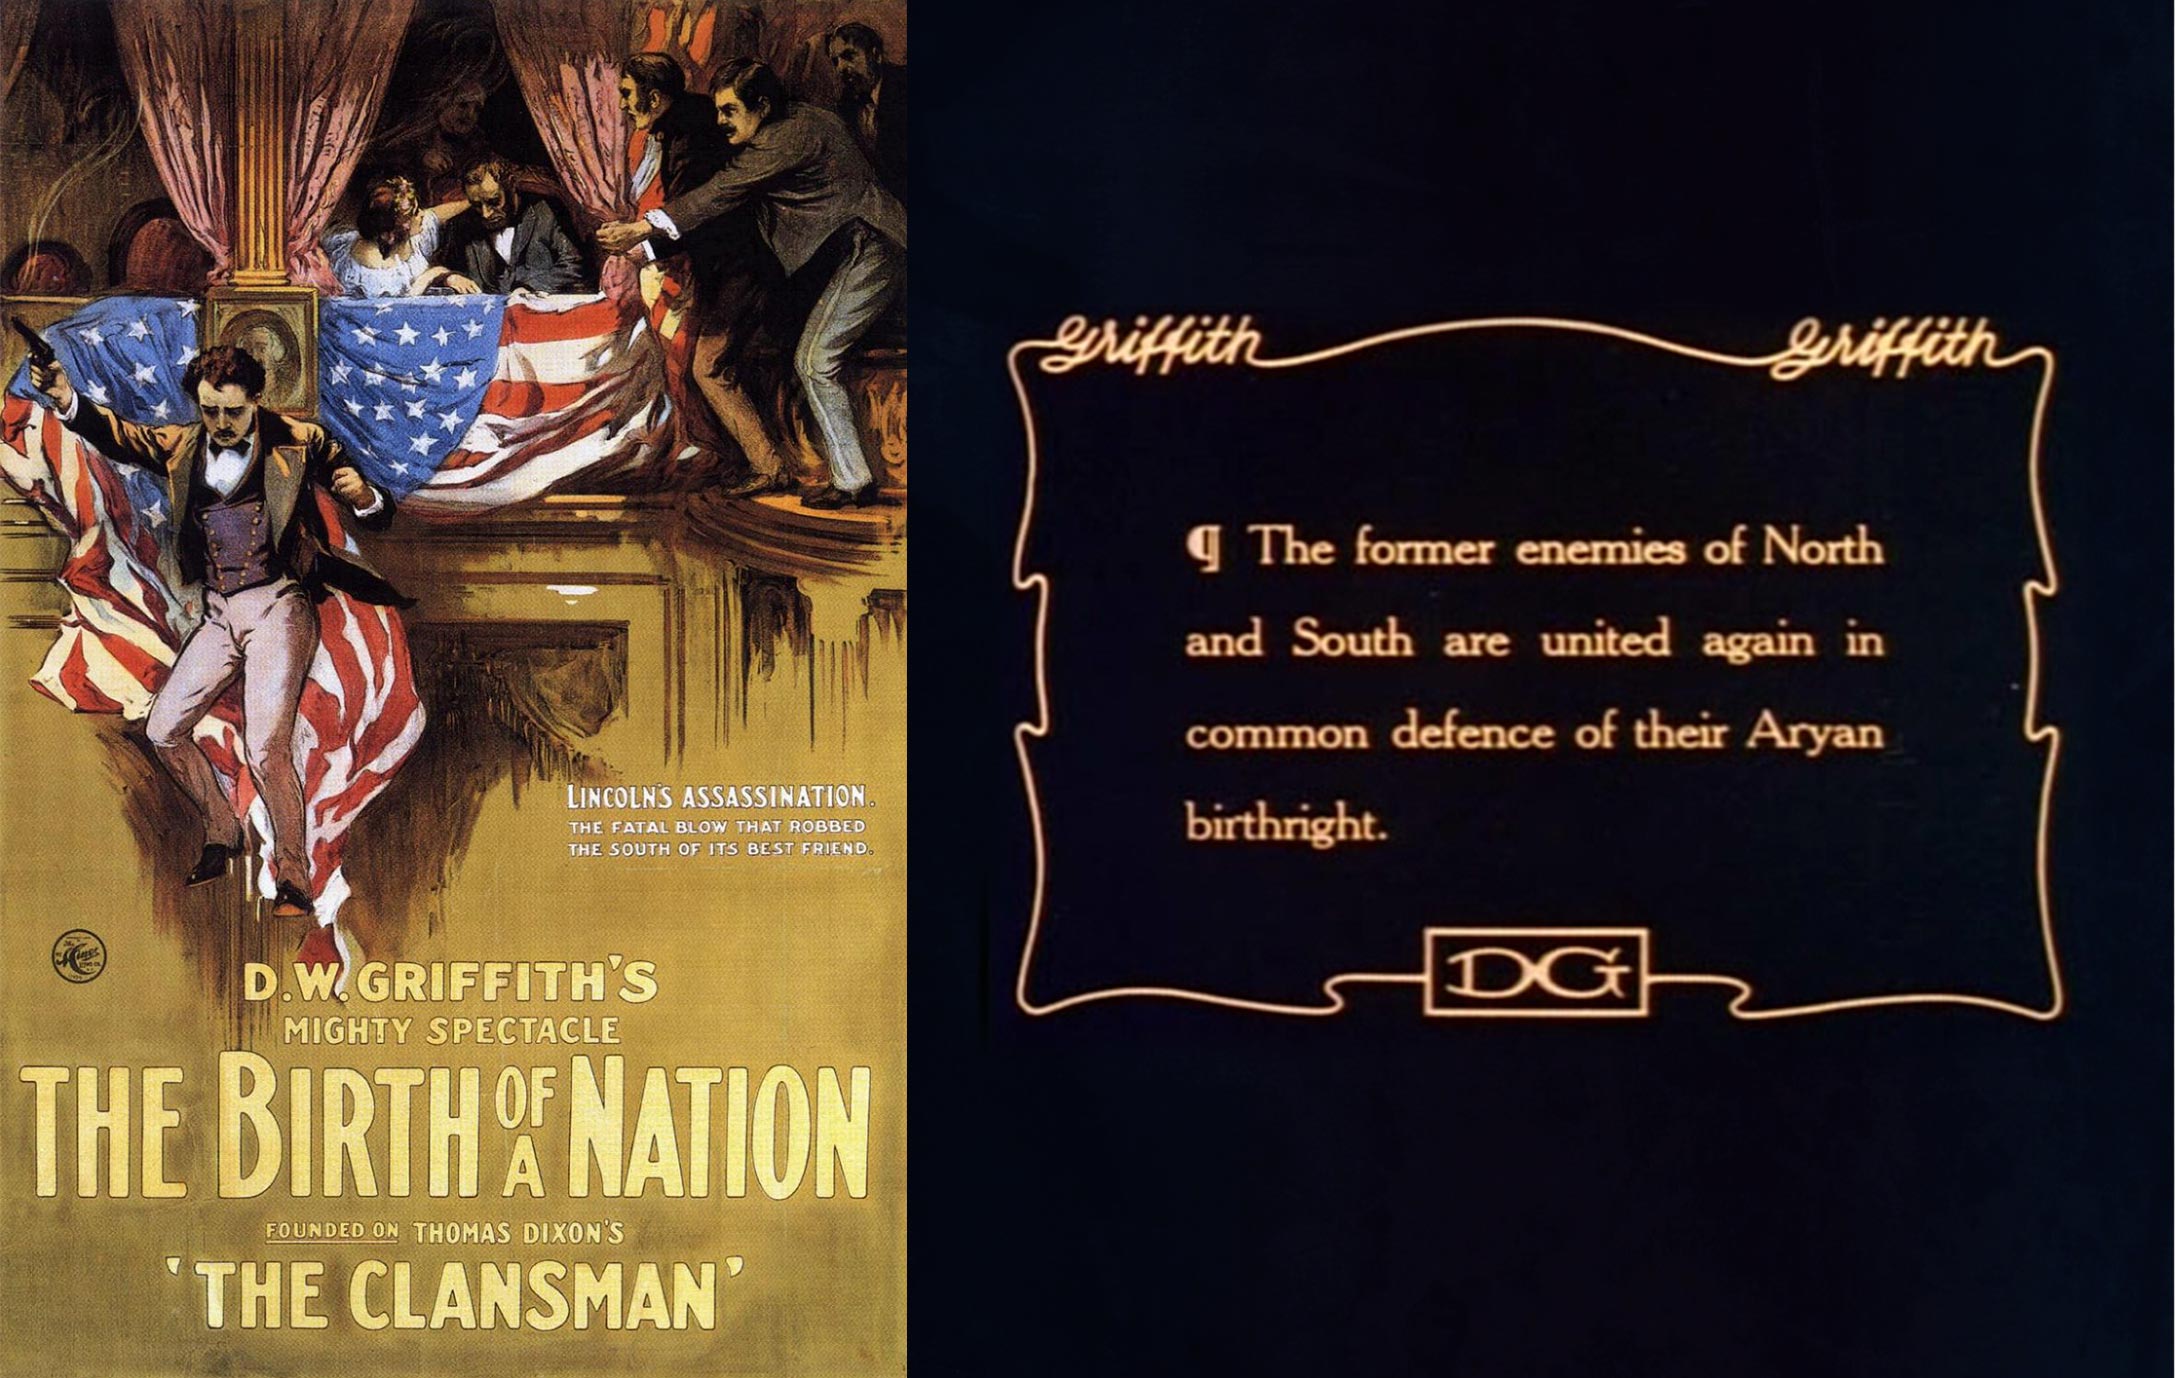 Book cover left reads The birth of a nation and the right rights: The former enemies of north and south are united again in common defence of their Aryan birthright